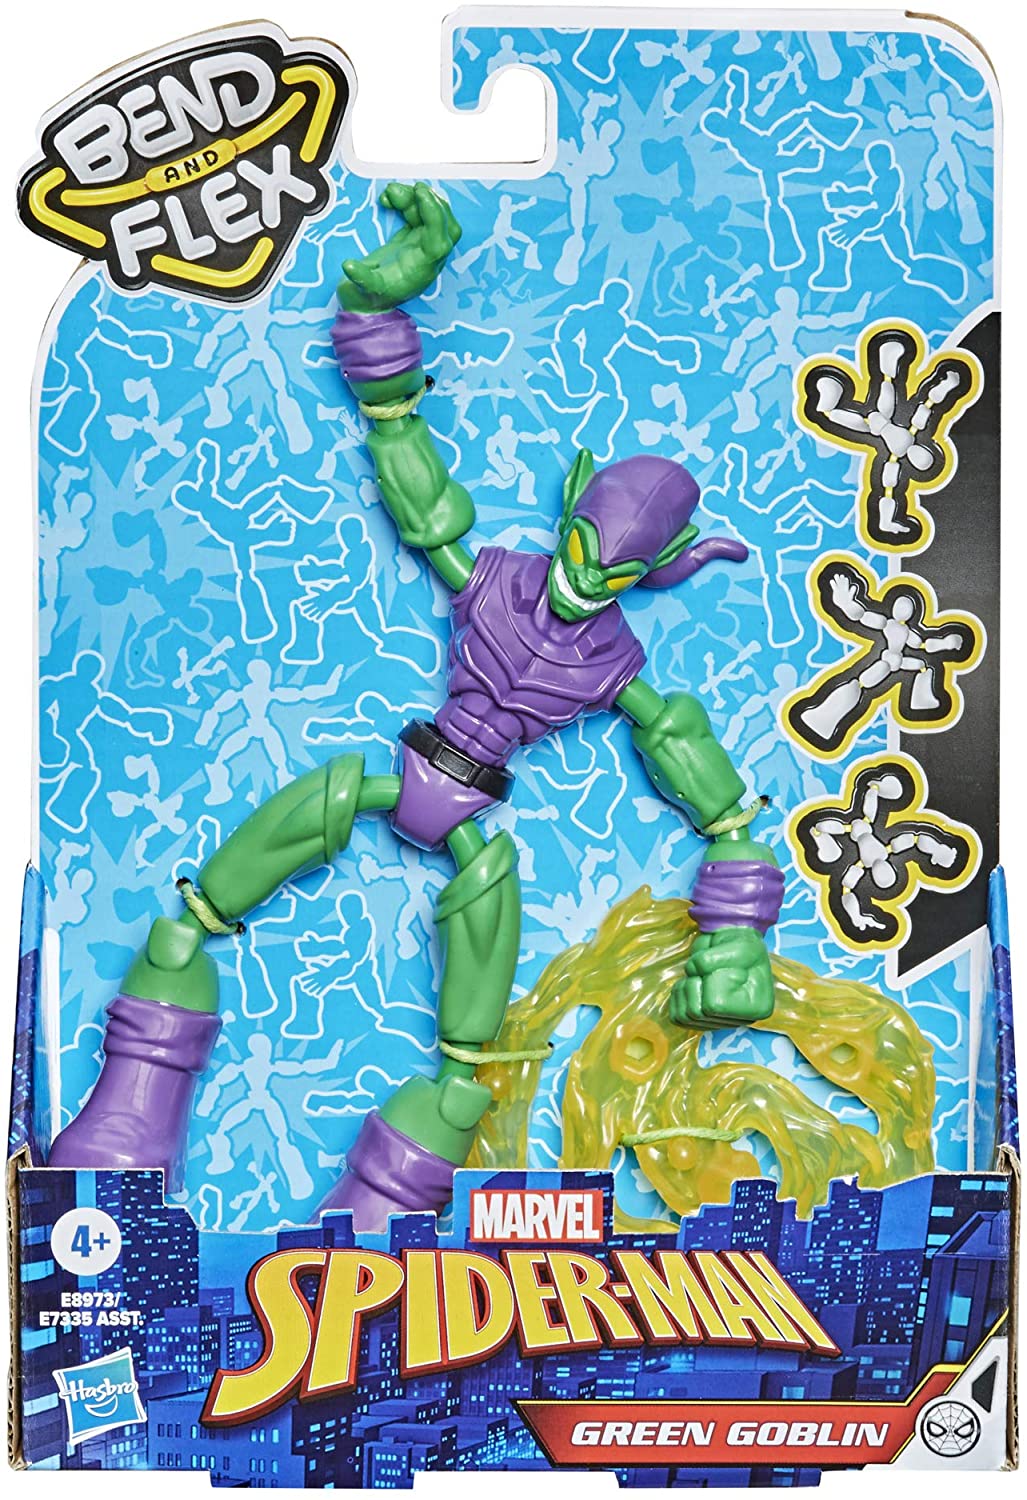 Hasbro Marvel Spider-Man Bend and Flex Green Goblin Action Figure, 6-Inch Flexible Figure, Includes Blast Accessories Ages 4 And Up, E8973